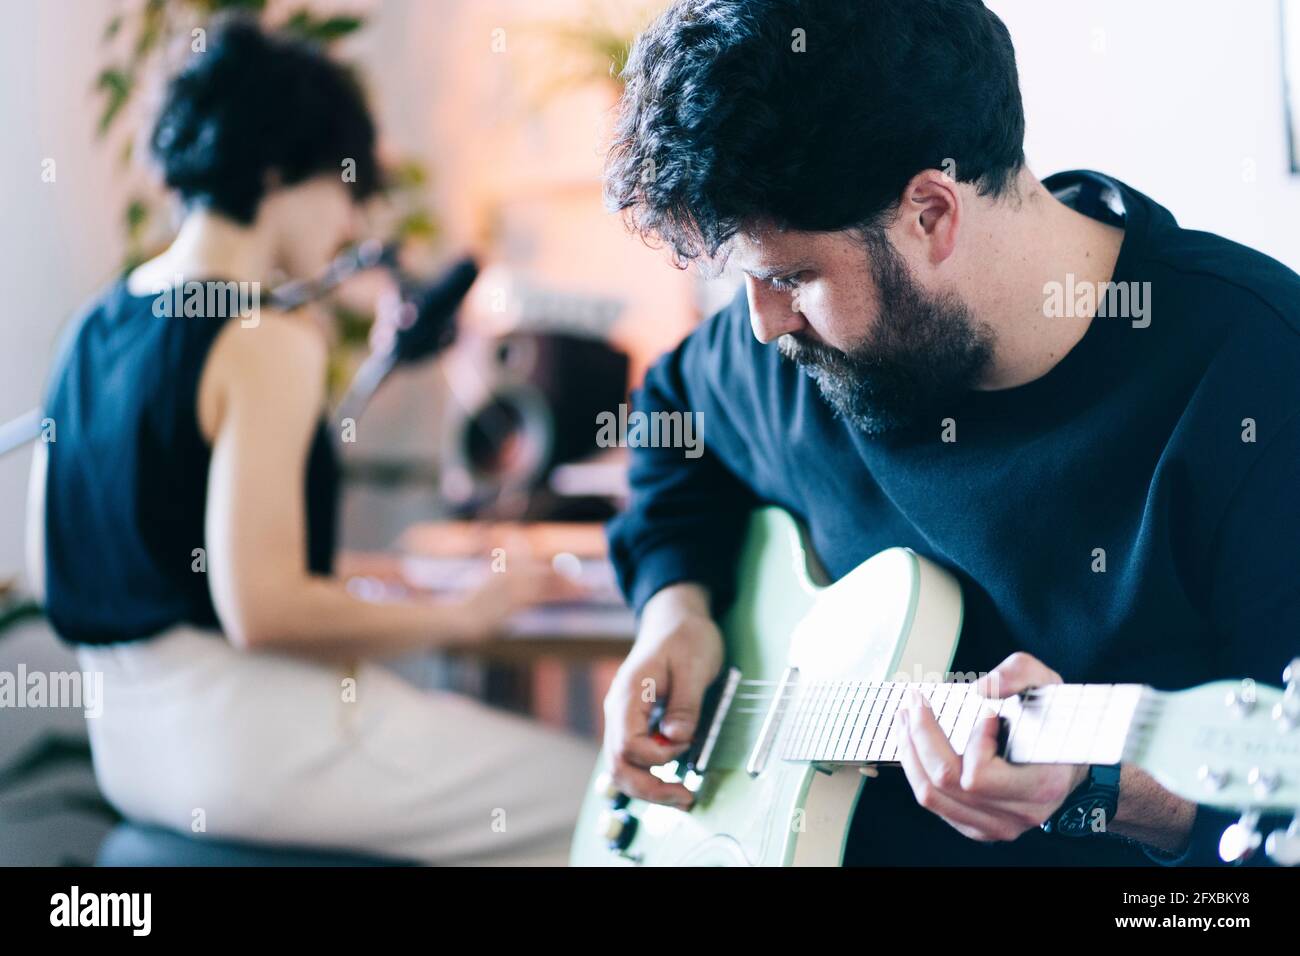 Male composer playing guitar in studio Stock Photo